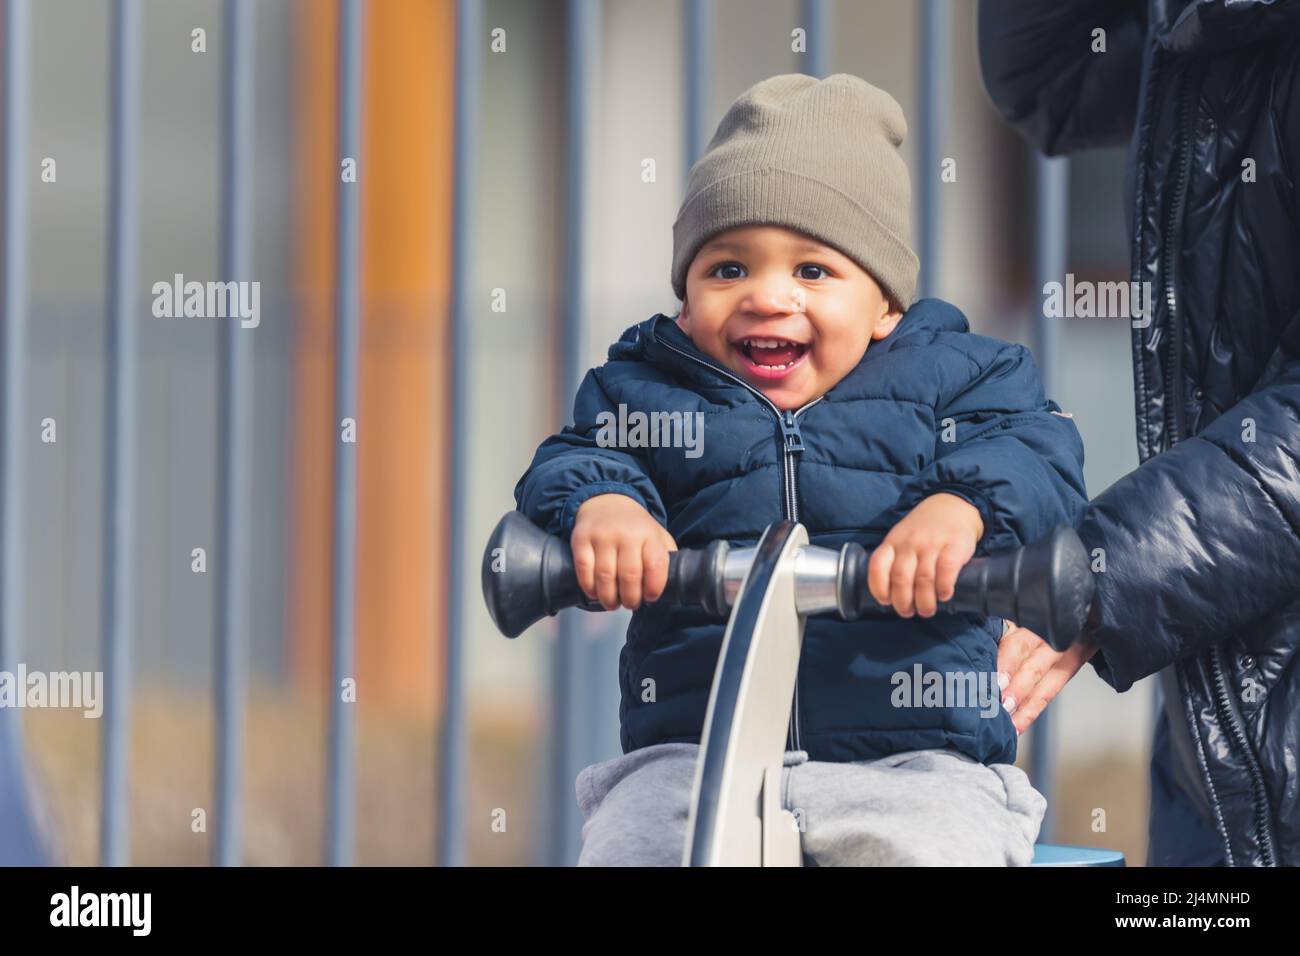 Outdoor portrait of an extremely happy smiley young biracial toddler in a gray hat and warm coat sitting on a playground spring rider and having fun. High quality photo Stock Photo